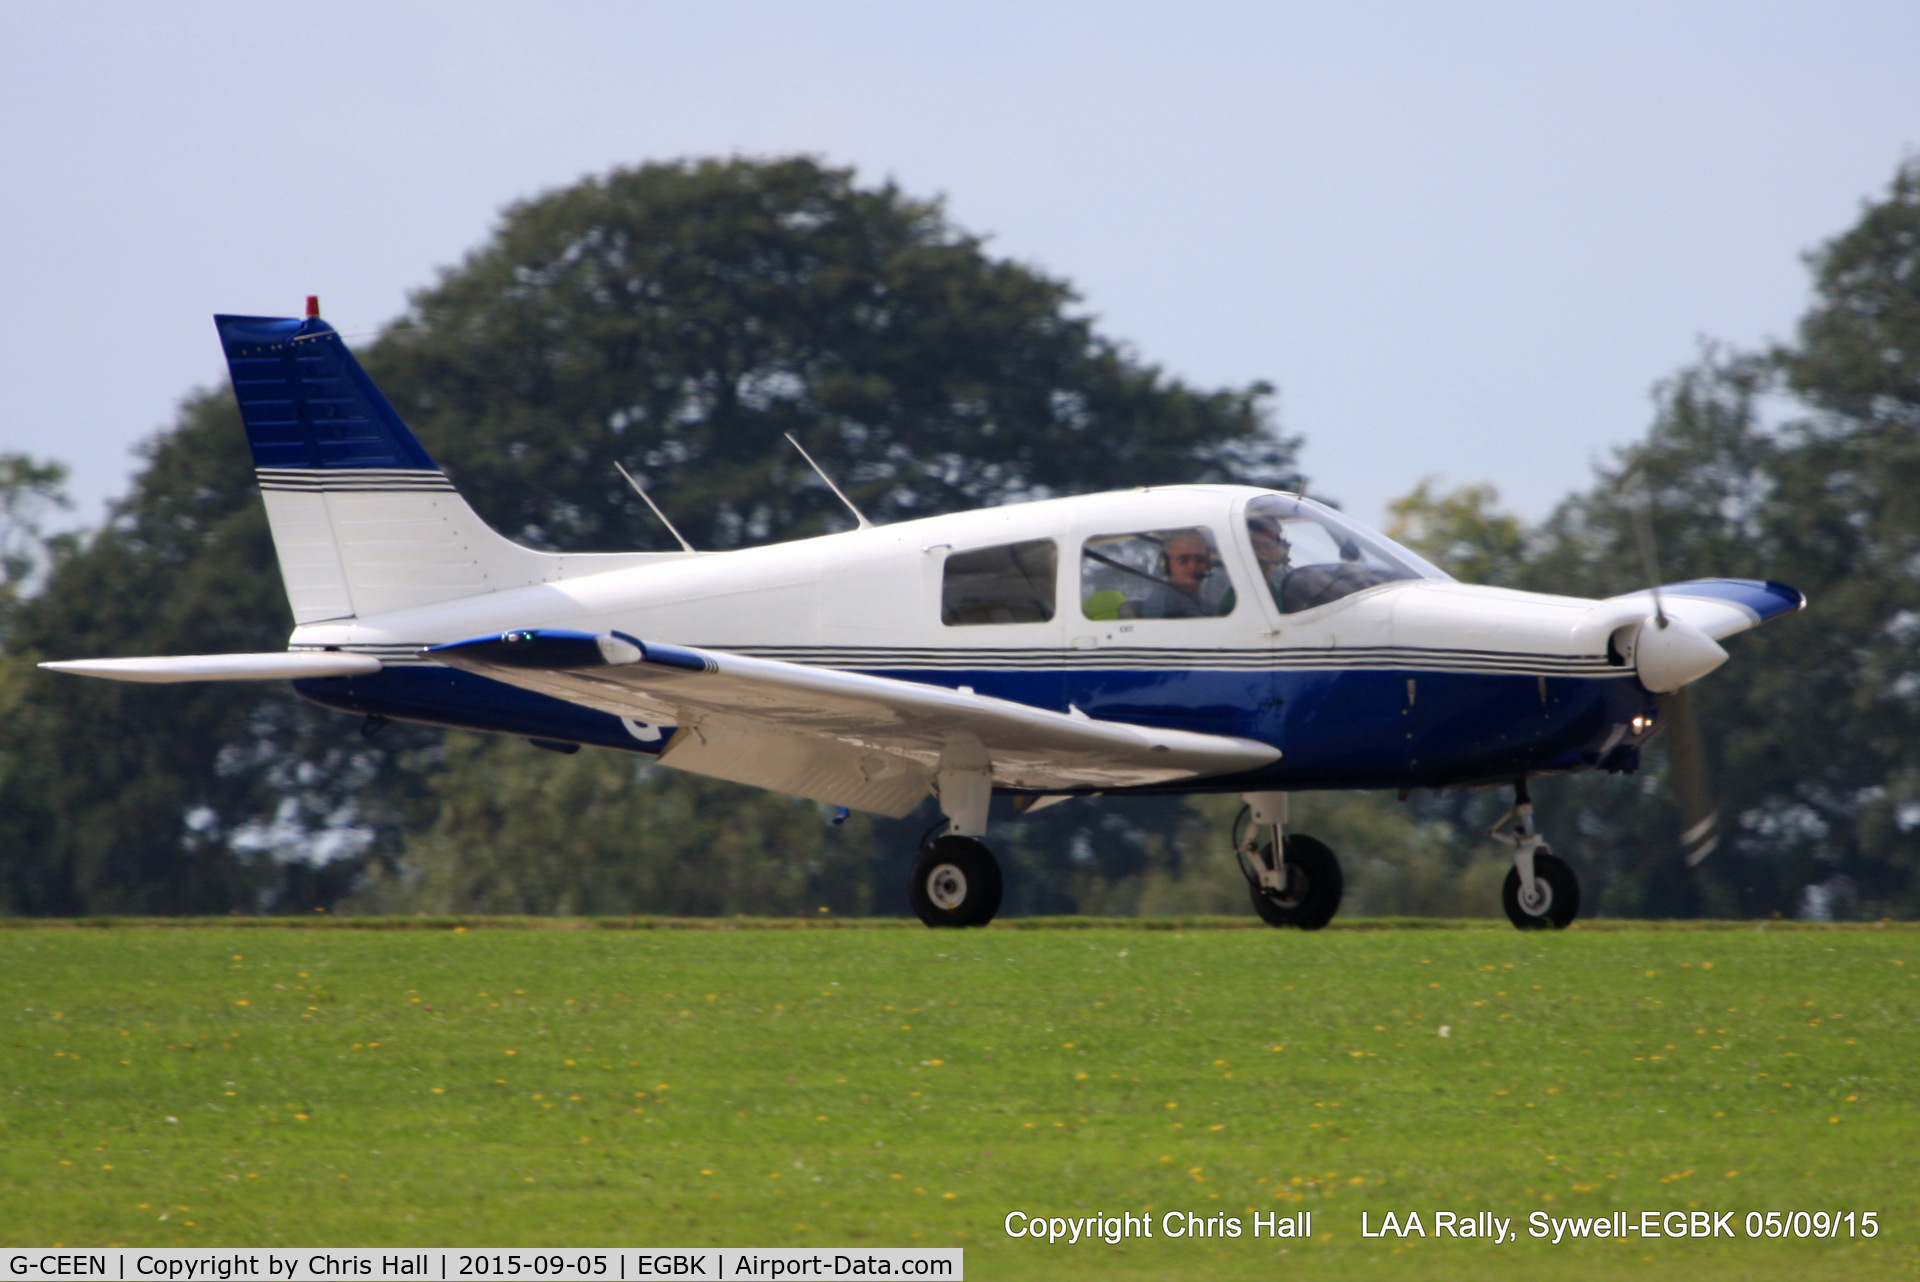 G-CEEN, 1990 Piper PA-28-161 Cadet C/N 2841293, at the LAA Rally 2015, Sywell